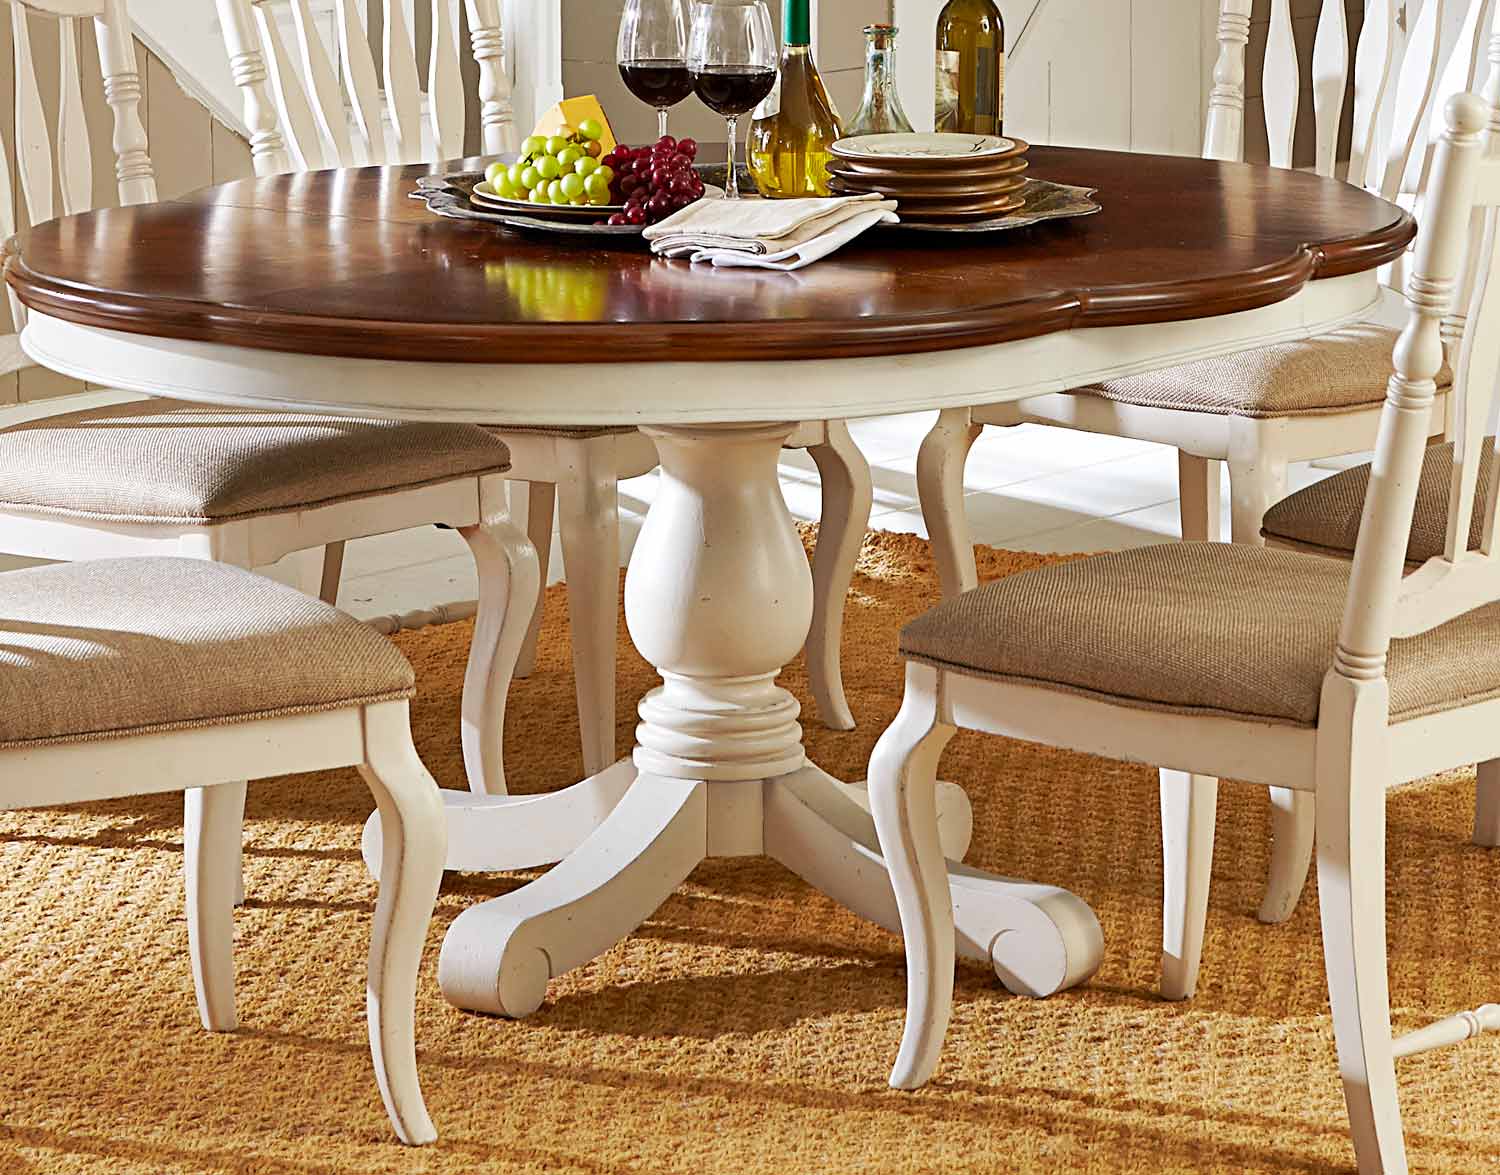 Legacy Classic Haven High/Low Pedestal Table - Buttercream White/Slight Distressing